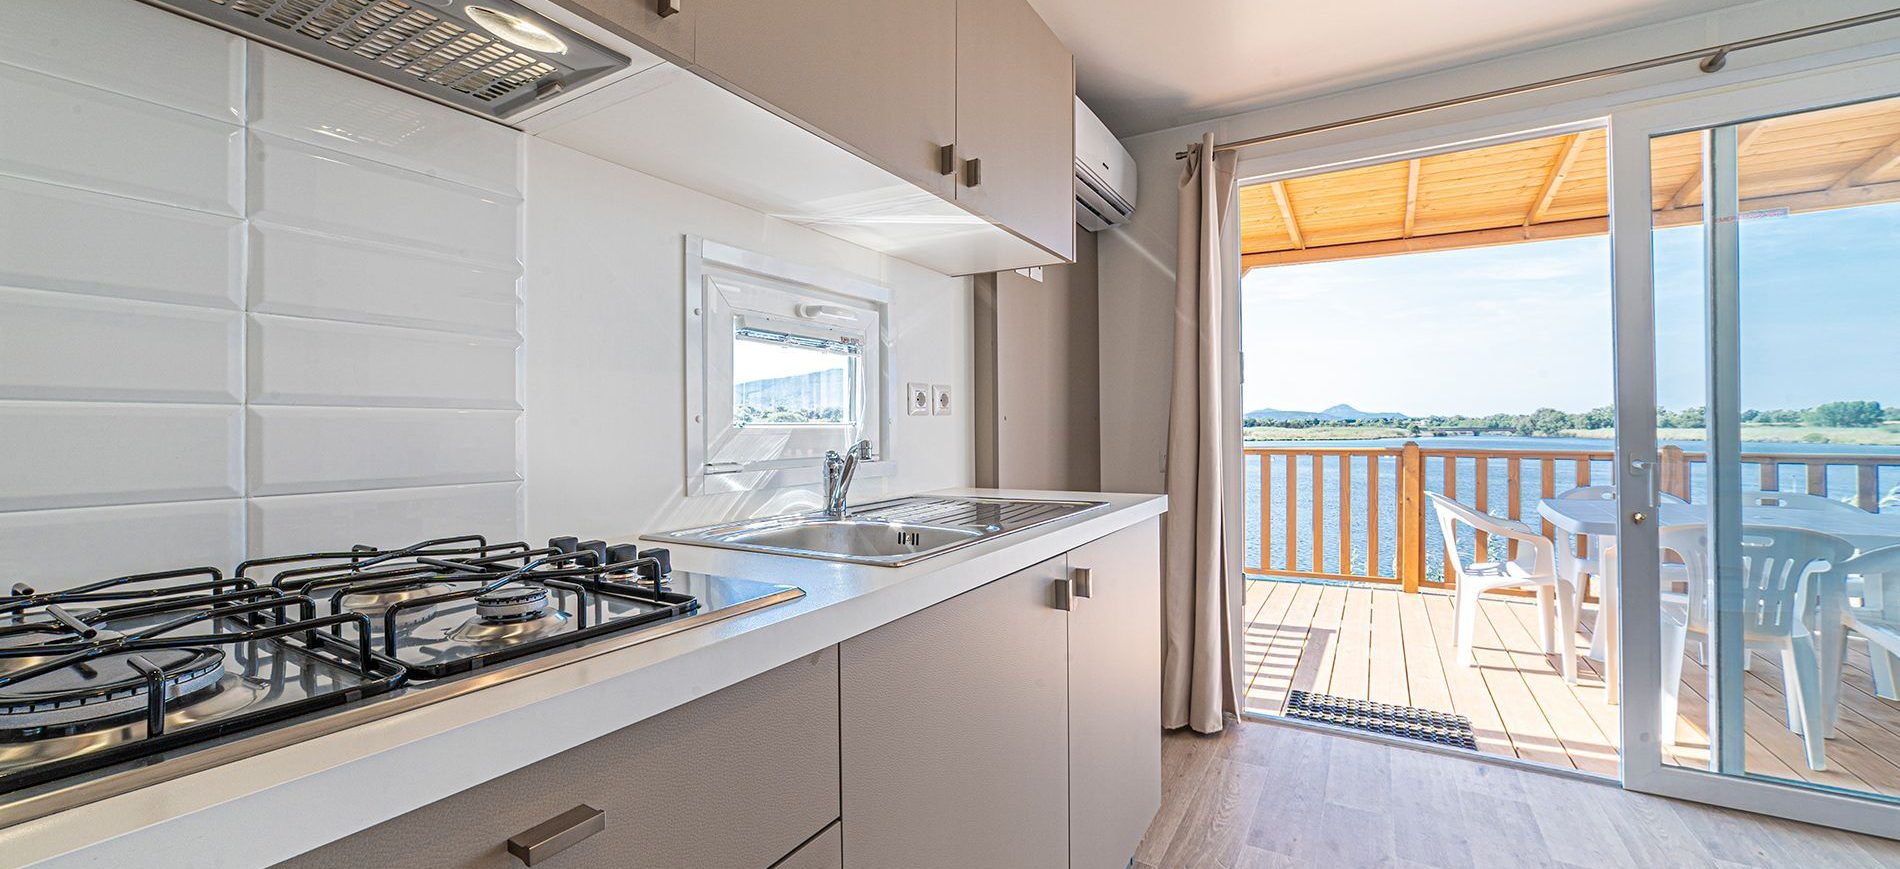 Baia Revolution, new mobile homes with a captivating and modern style